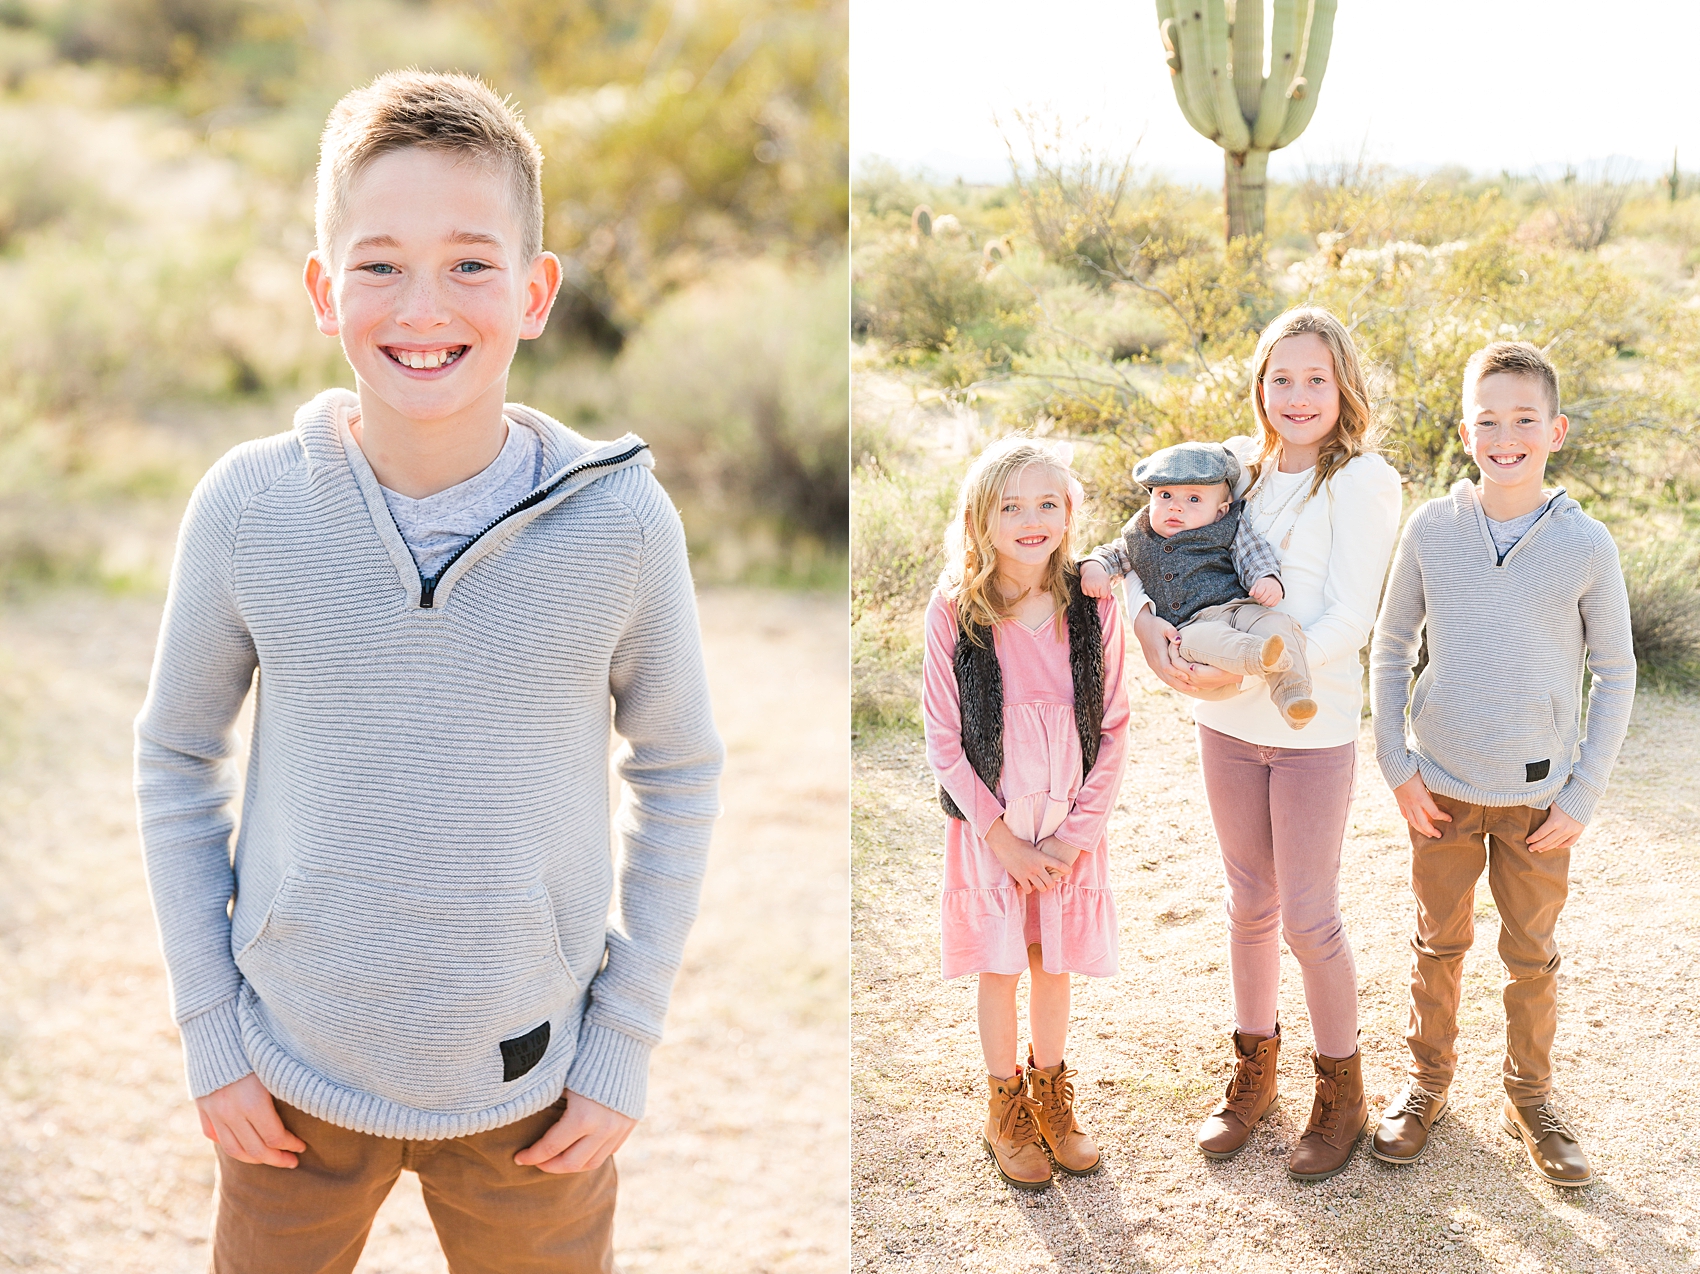 Leah Hope Photography | Scottsdale Phoenix Arizona | Desert Landscape Cactus Scenery | Saguaro | Extended Family Pictures | Family Photos | What to Wear | Family Poses